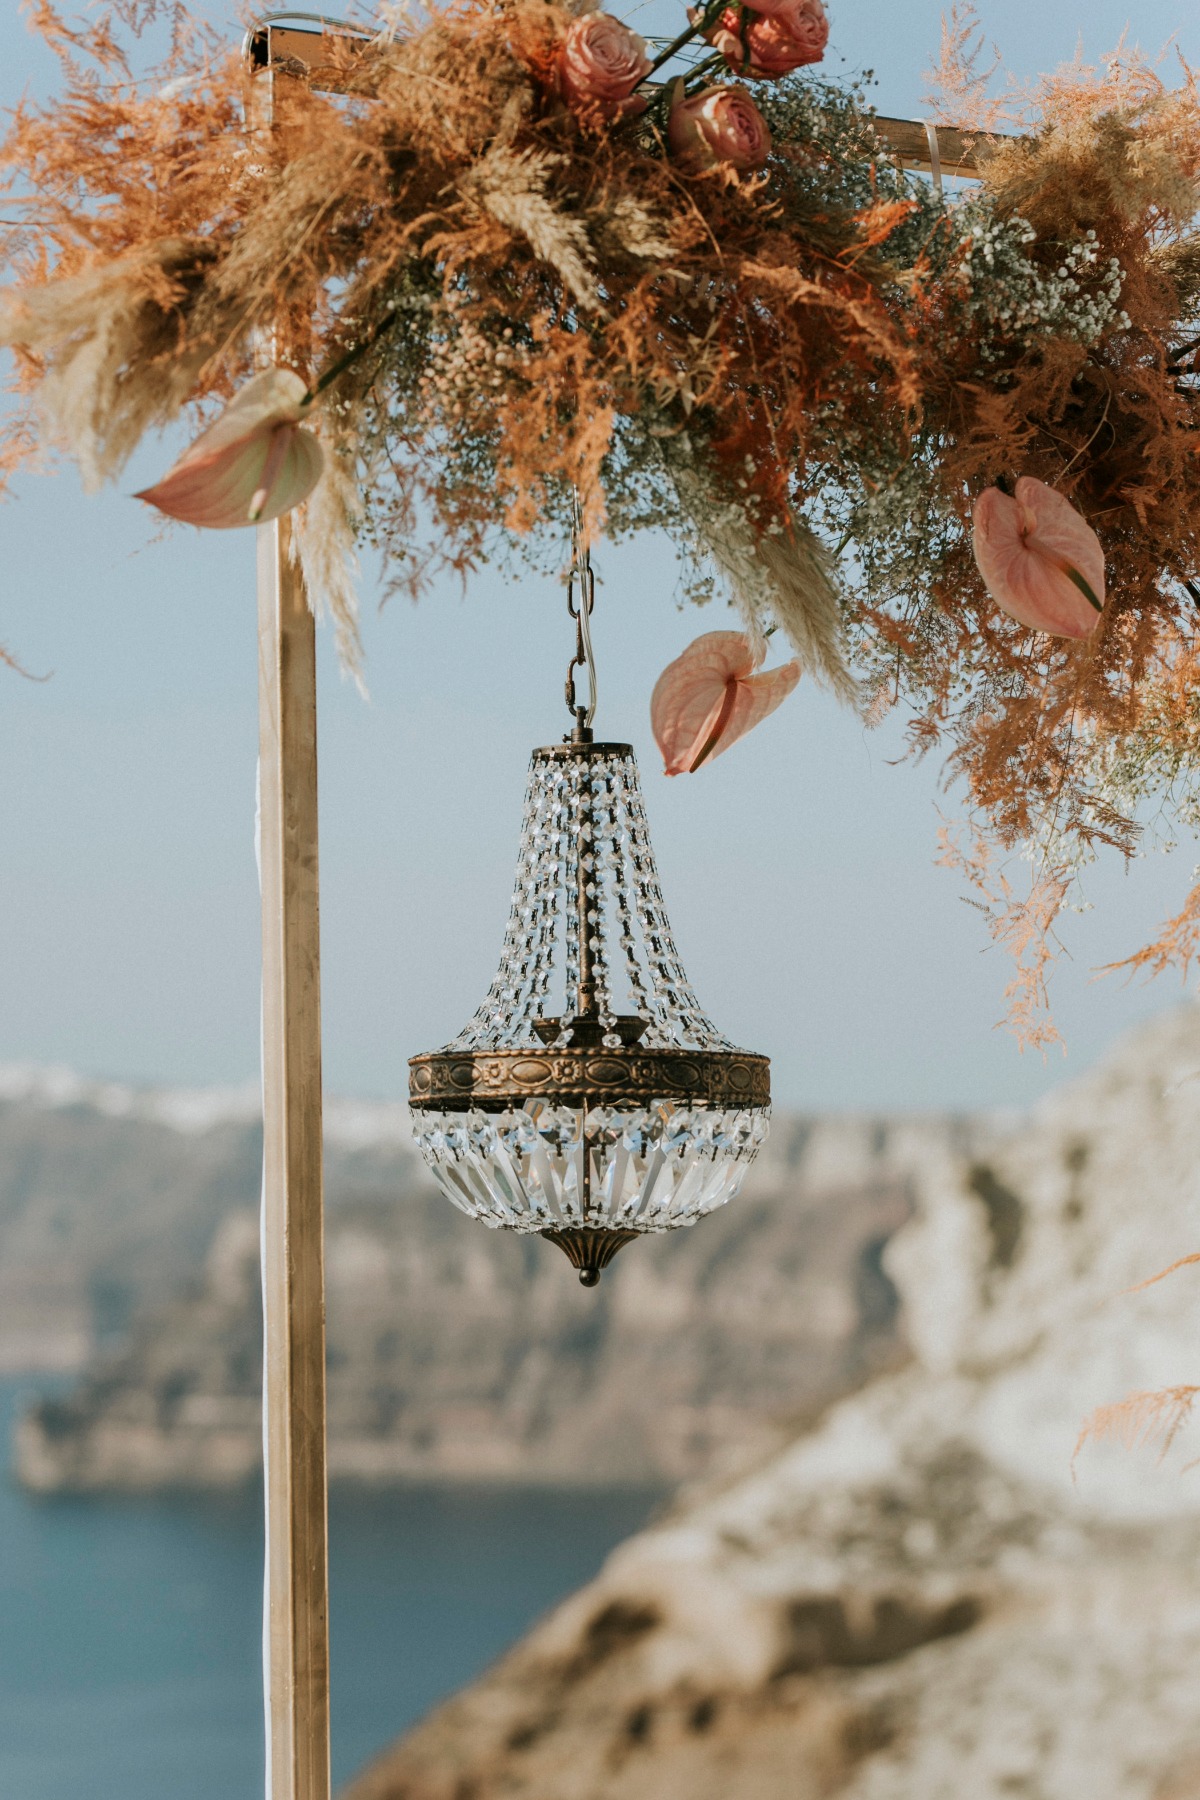 Earth Tone Elopement In Santorini That Will Make You Rethink A Neutral Wedding Color Palette